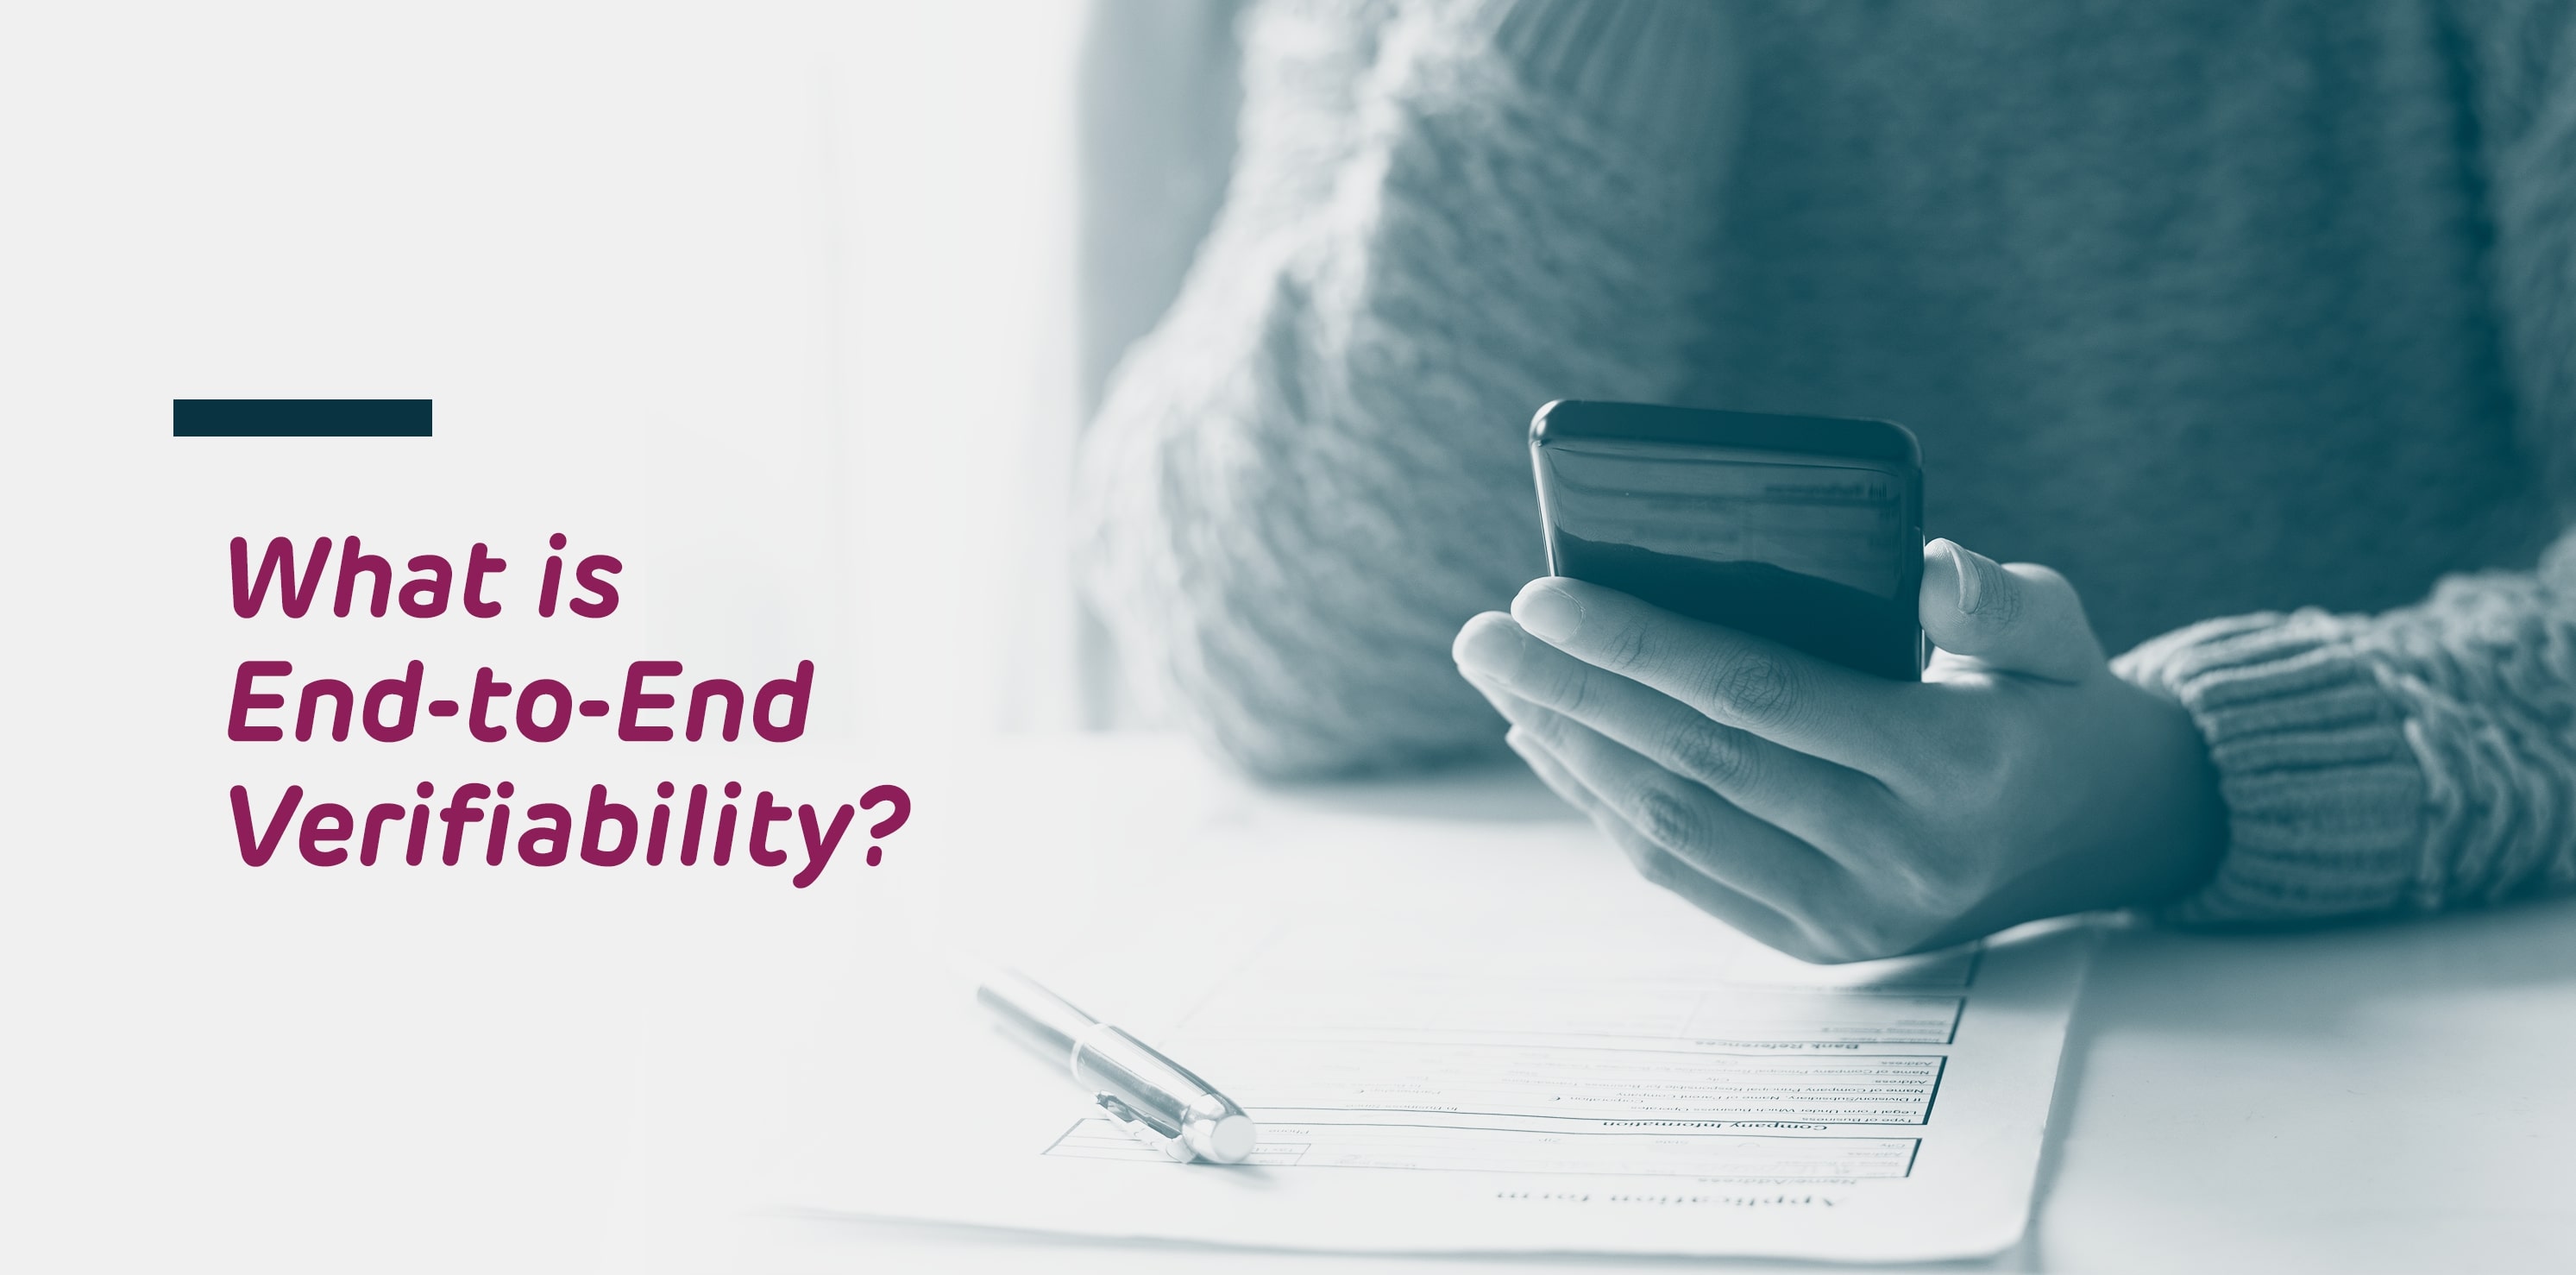 What is end-to-end verifiability?